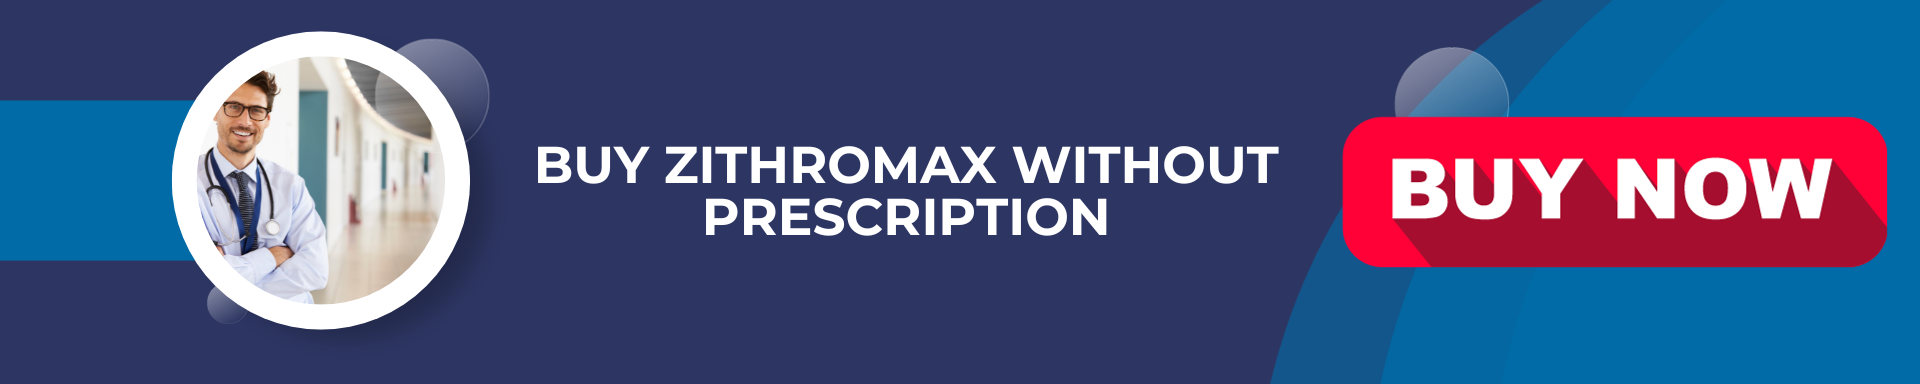 Buy zithromax over the counter